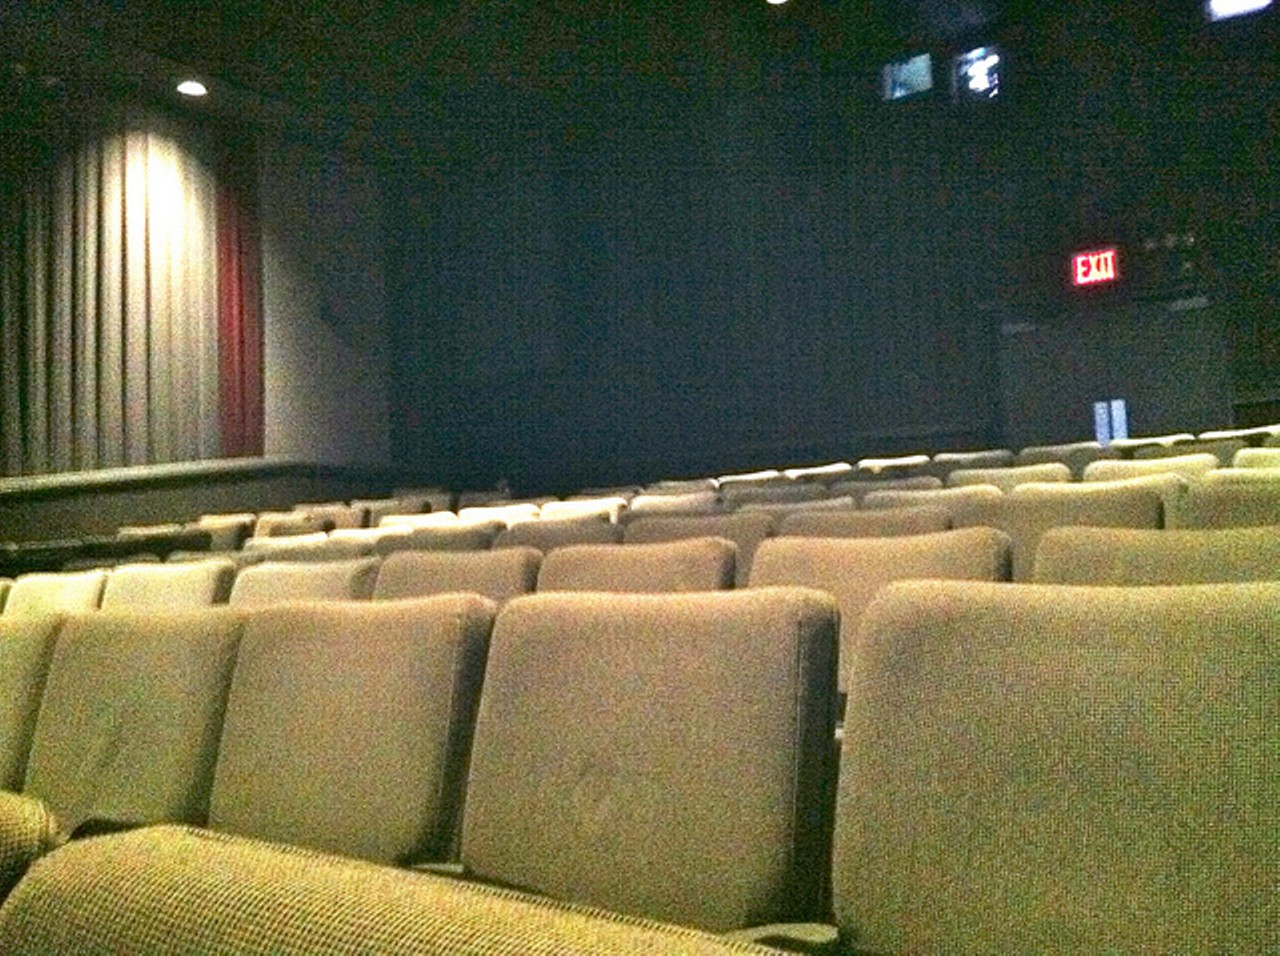 Watch a different big screen
Movie theatres are usually empty on Super Bowl sunday, so you can practically have the place to yourself. Losing yourself in a film is the best escape from sports silliness.
Photo credit: Sarah Lou / Flickr